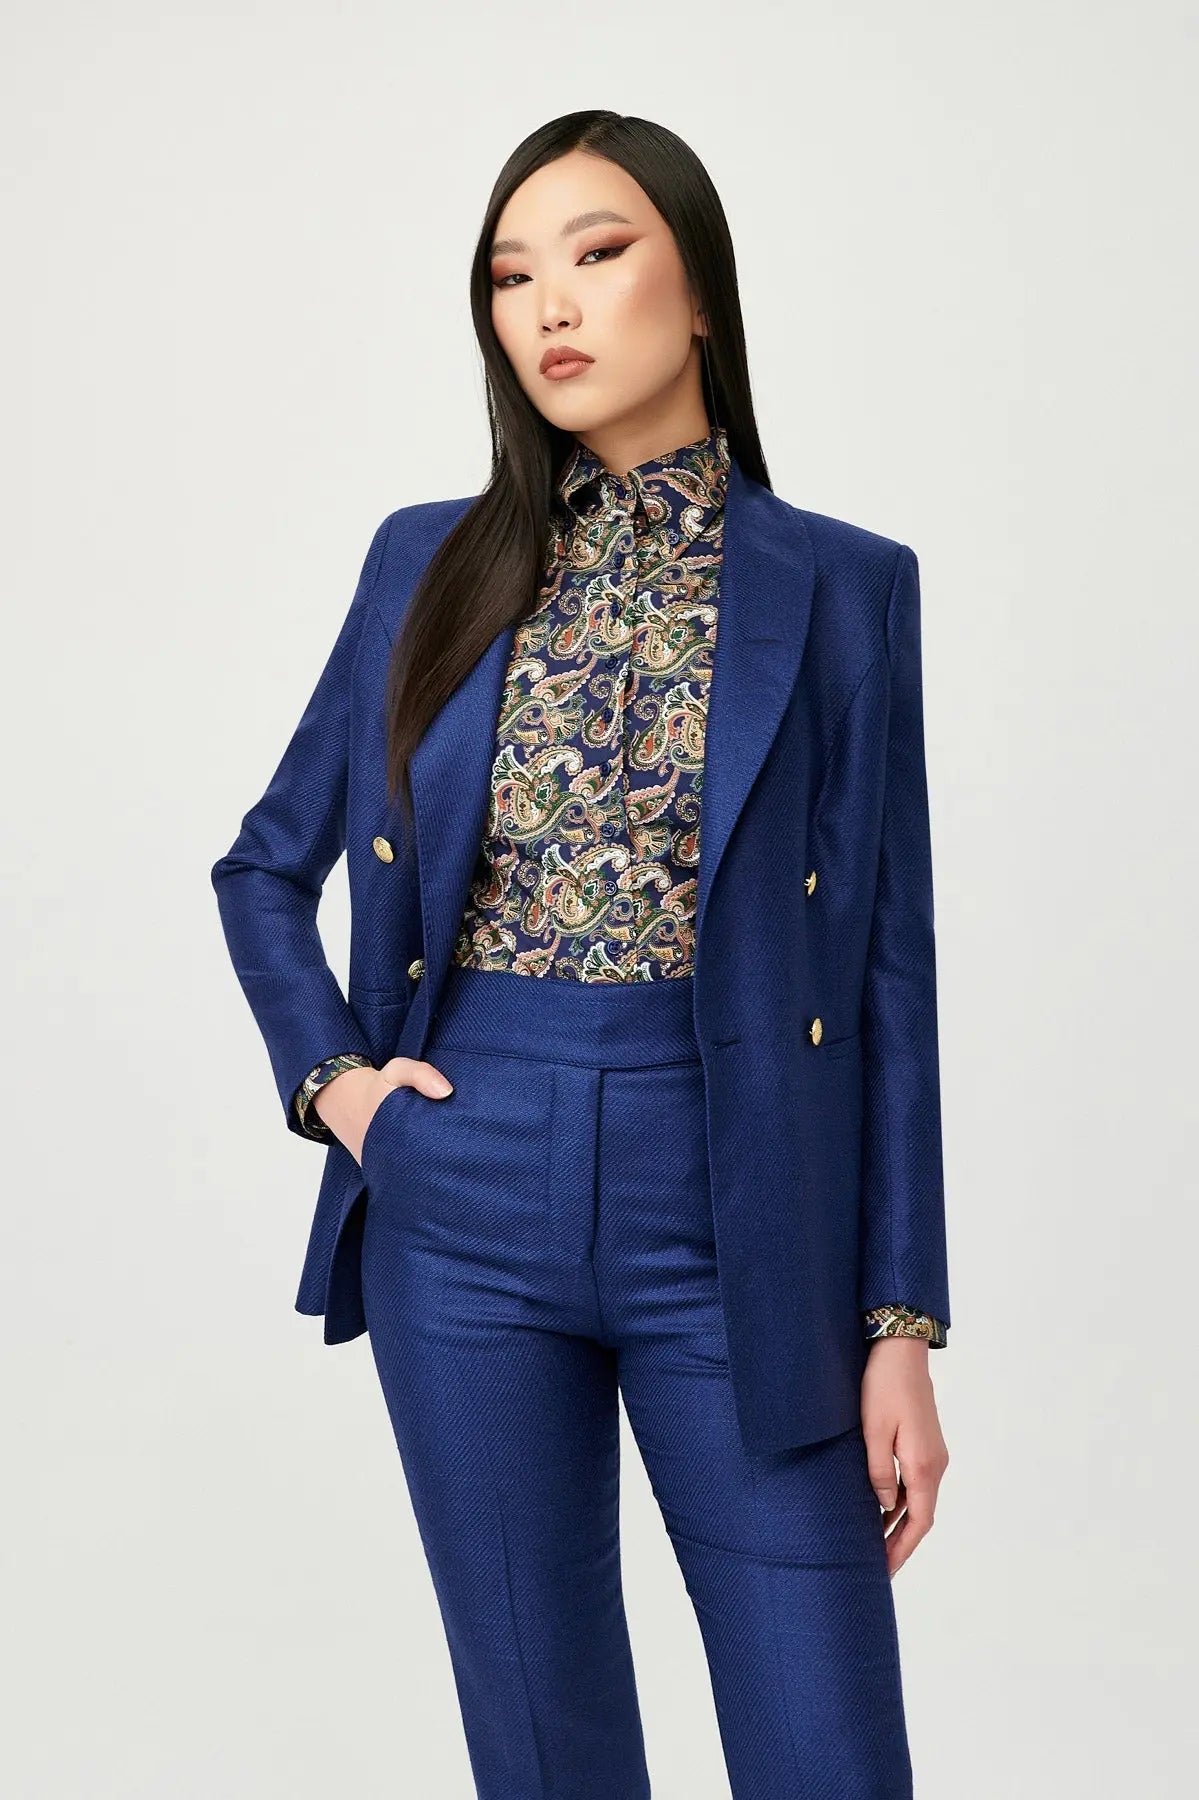 Emery Double Breasted Suit with Gold Buttons - Alexandra-Dobre.com